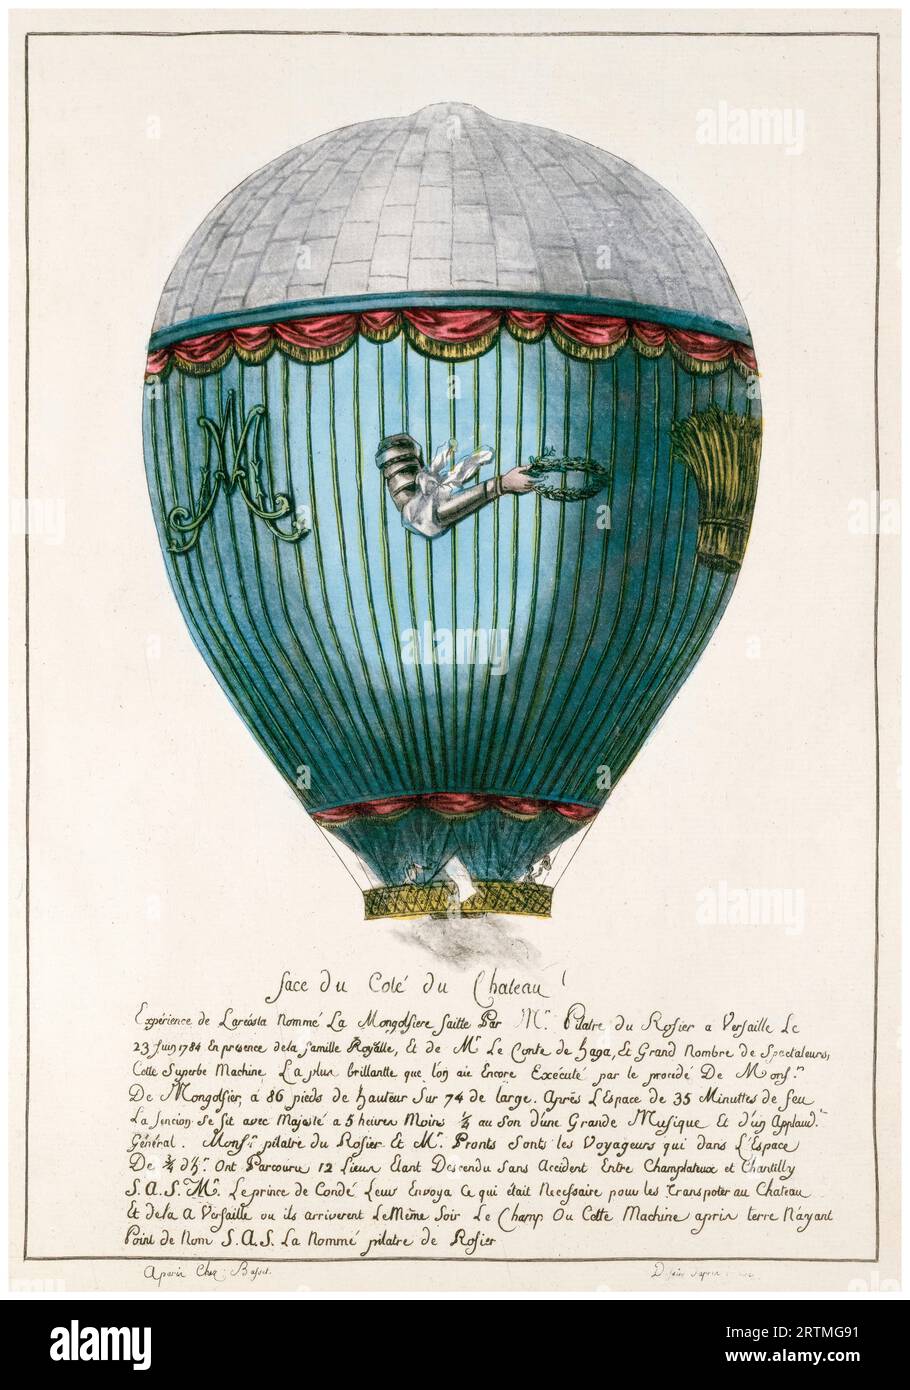 The Marie Antoinette hot-air balloon used by Jean-François Pilâtre de Rozier (1754-1785) at the Chateau de Versailles on June 23rd 1784, hand-coloured engraving, circa 1784 Stock Photo